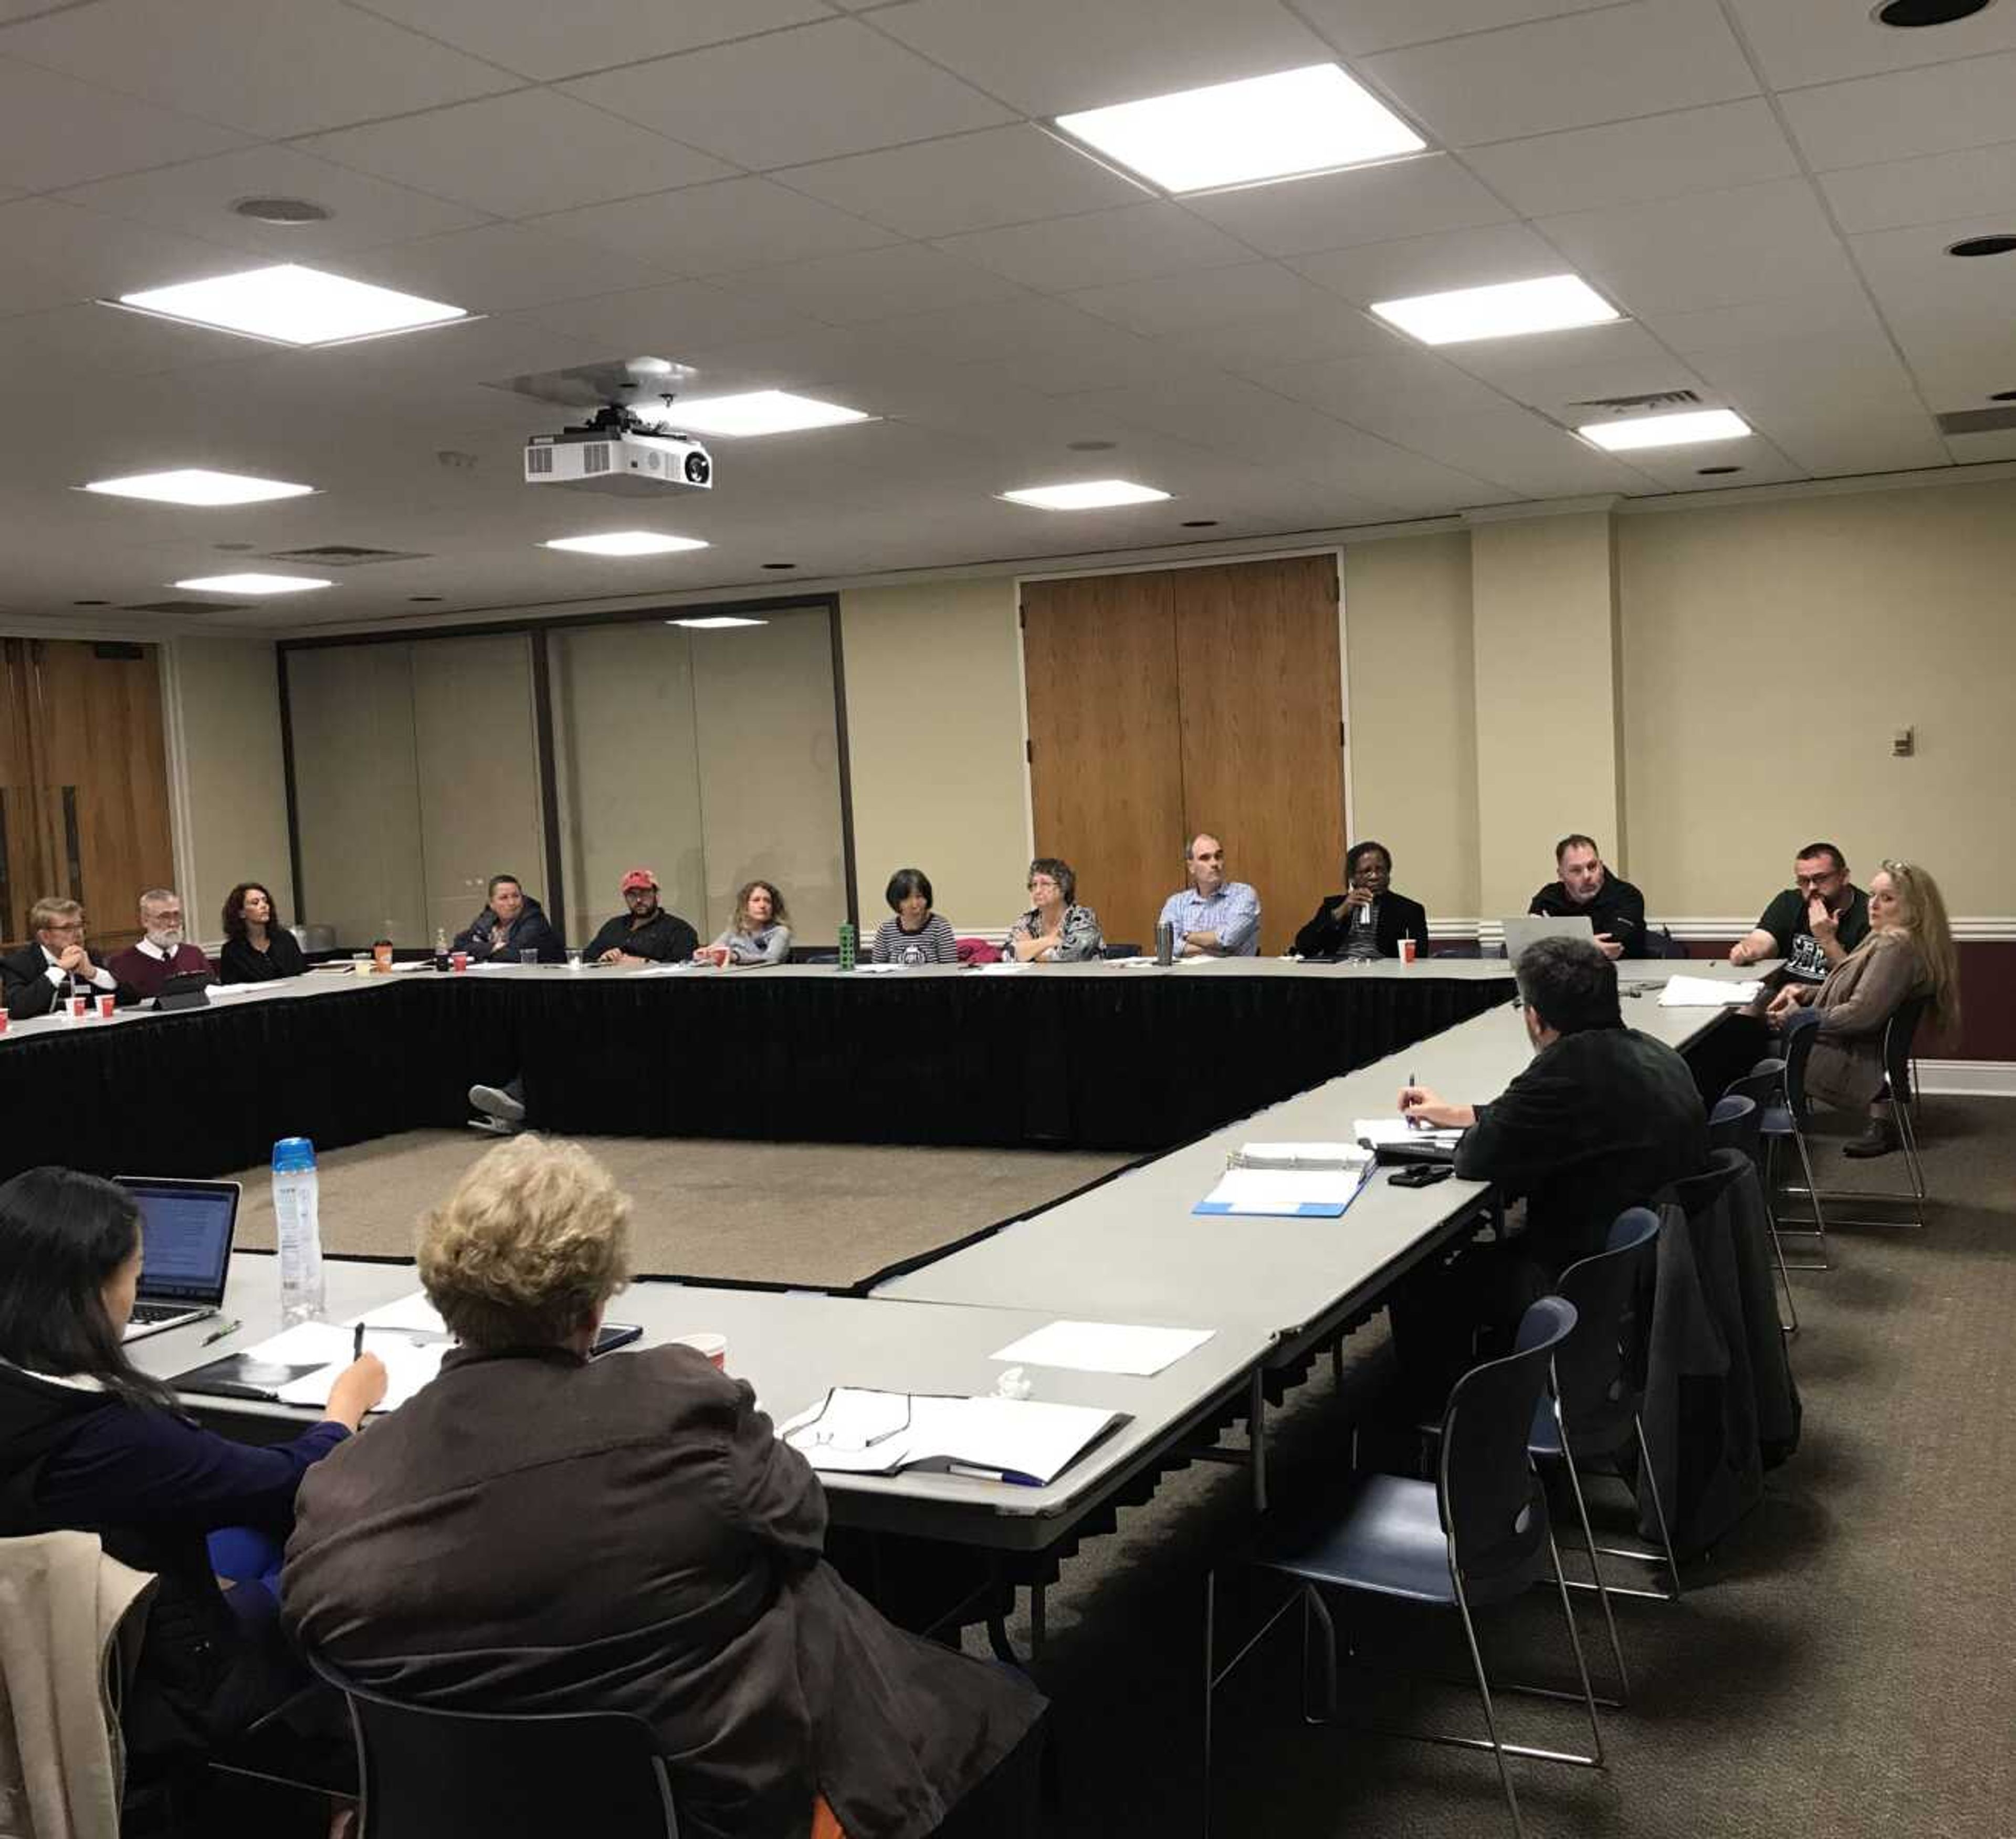 Communication issues and adjustments discussed at faculty senate meeting